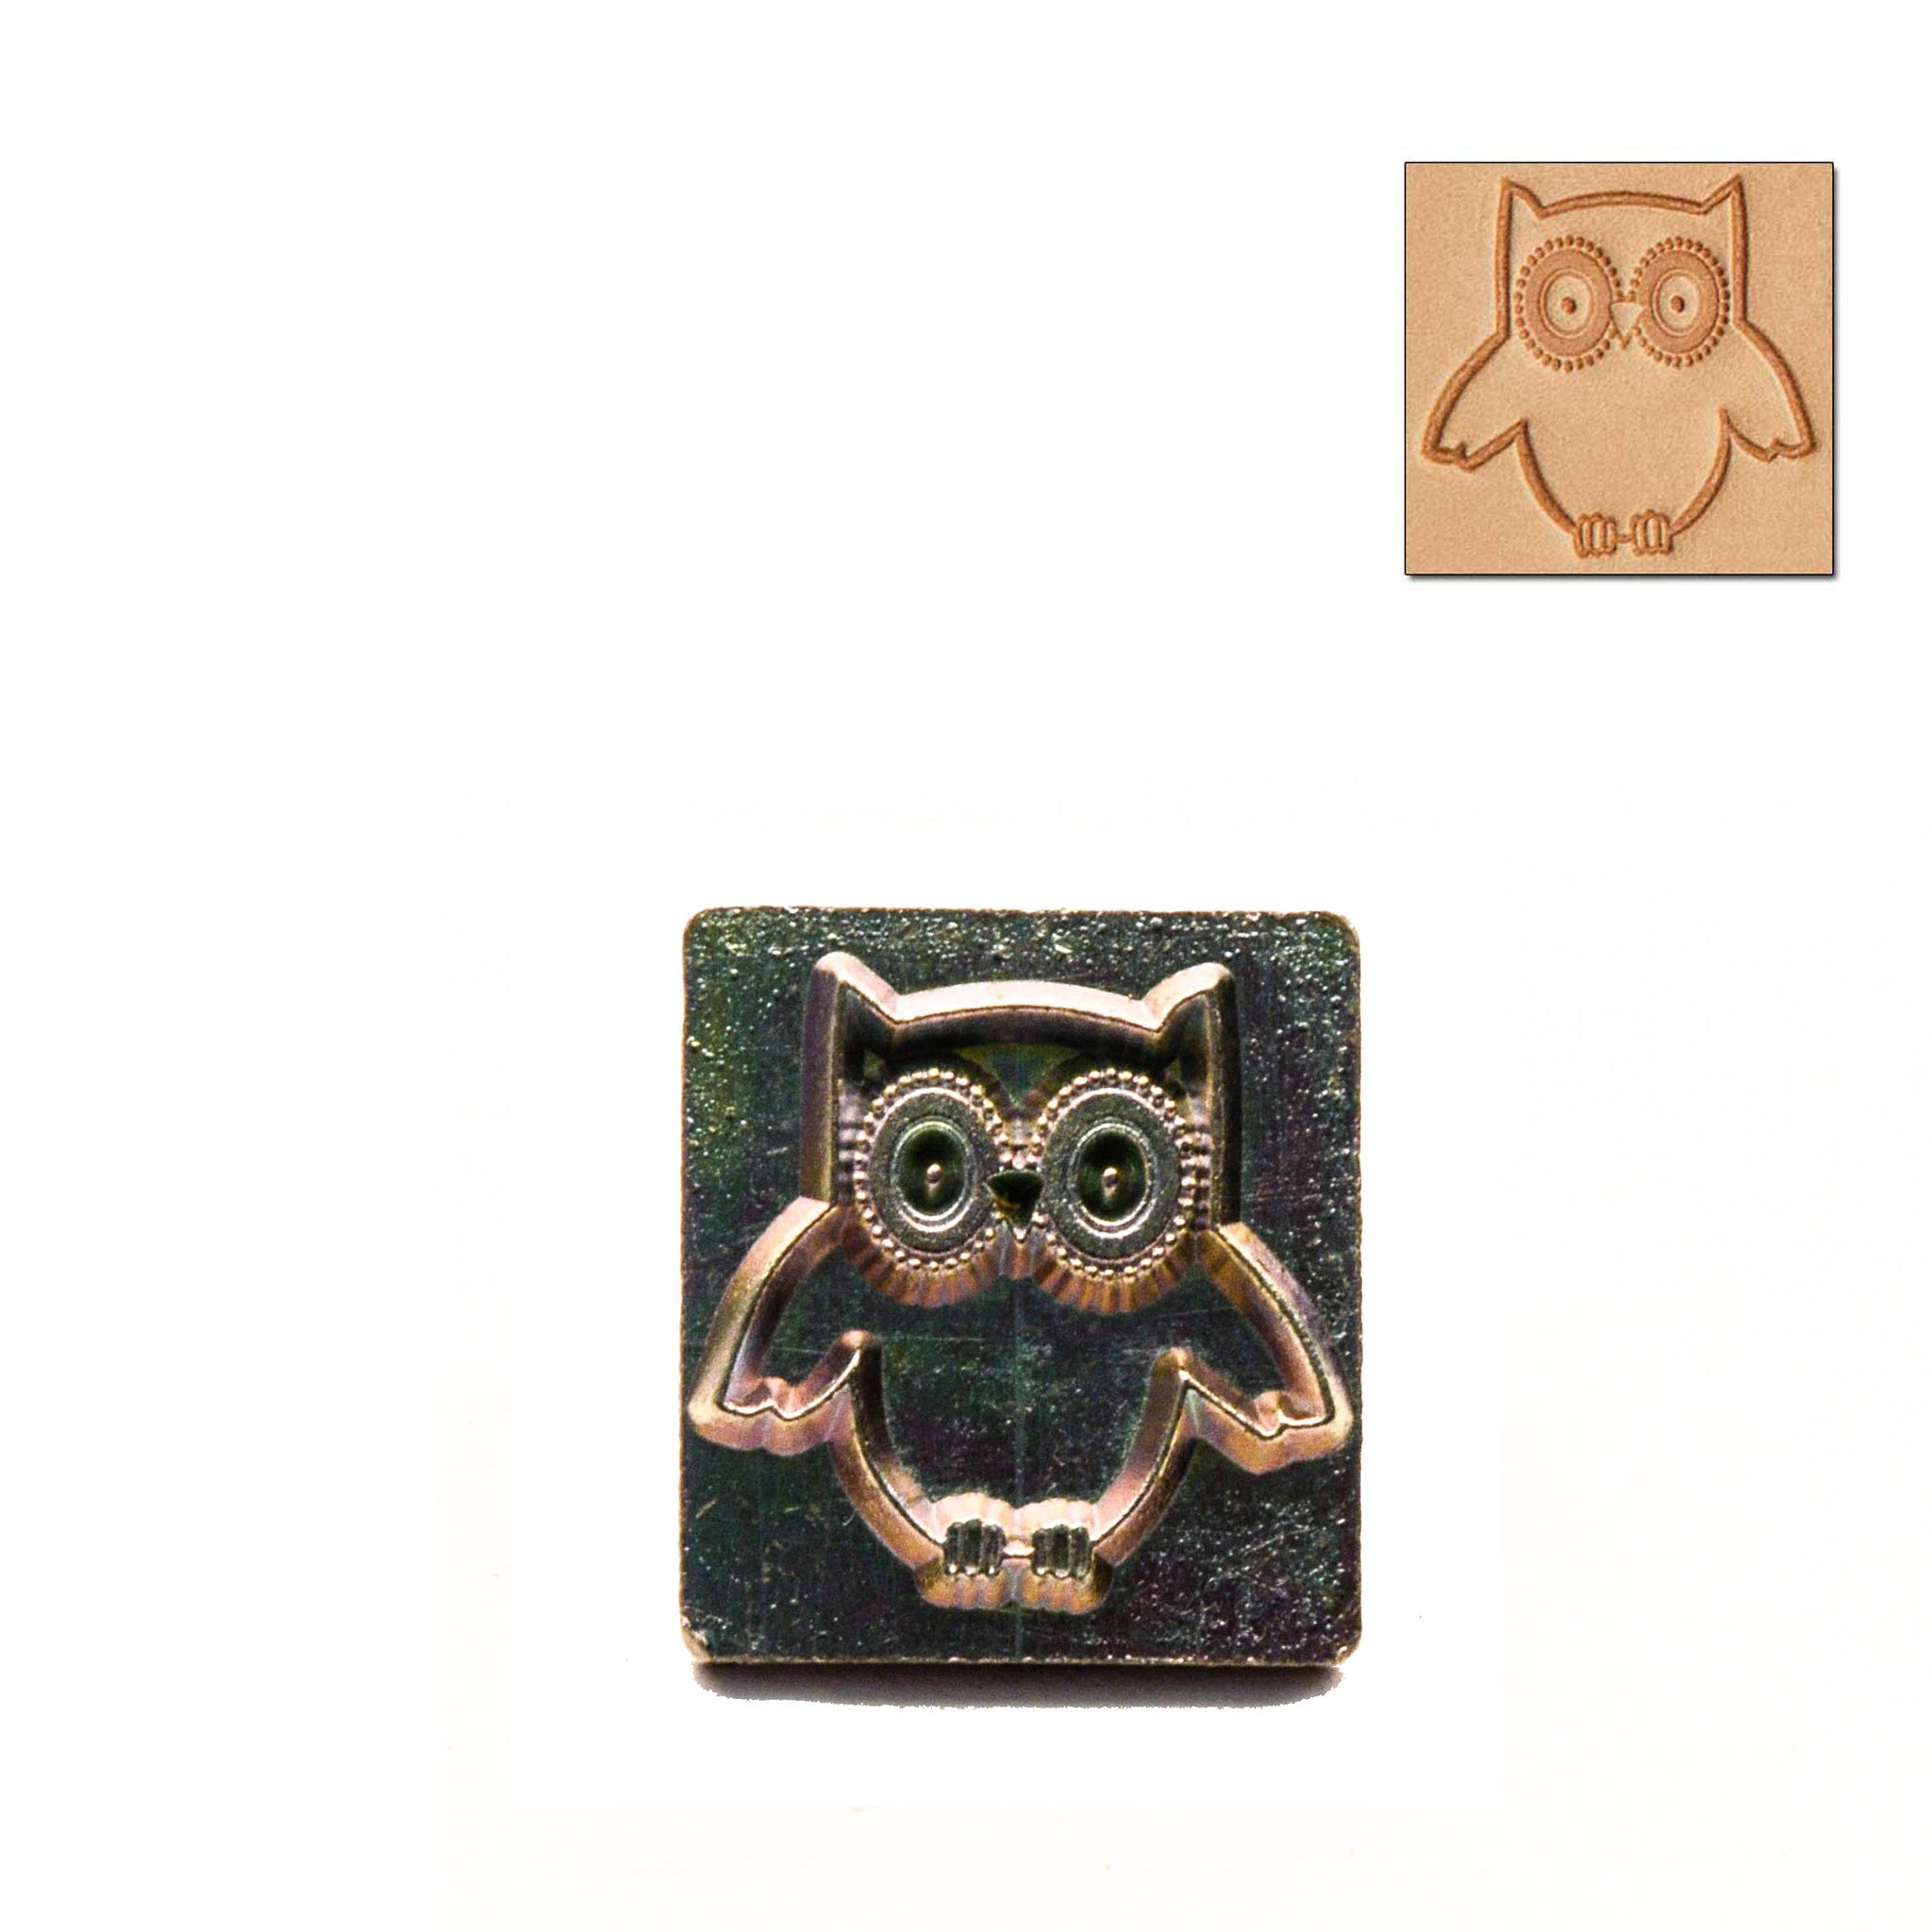 Owl 3D Embossing Stamp from Identity Leathercraft